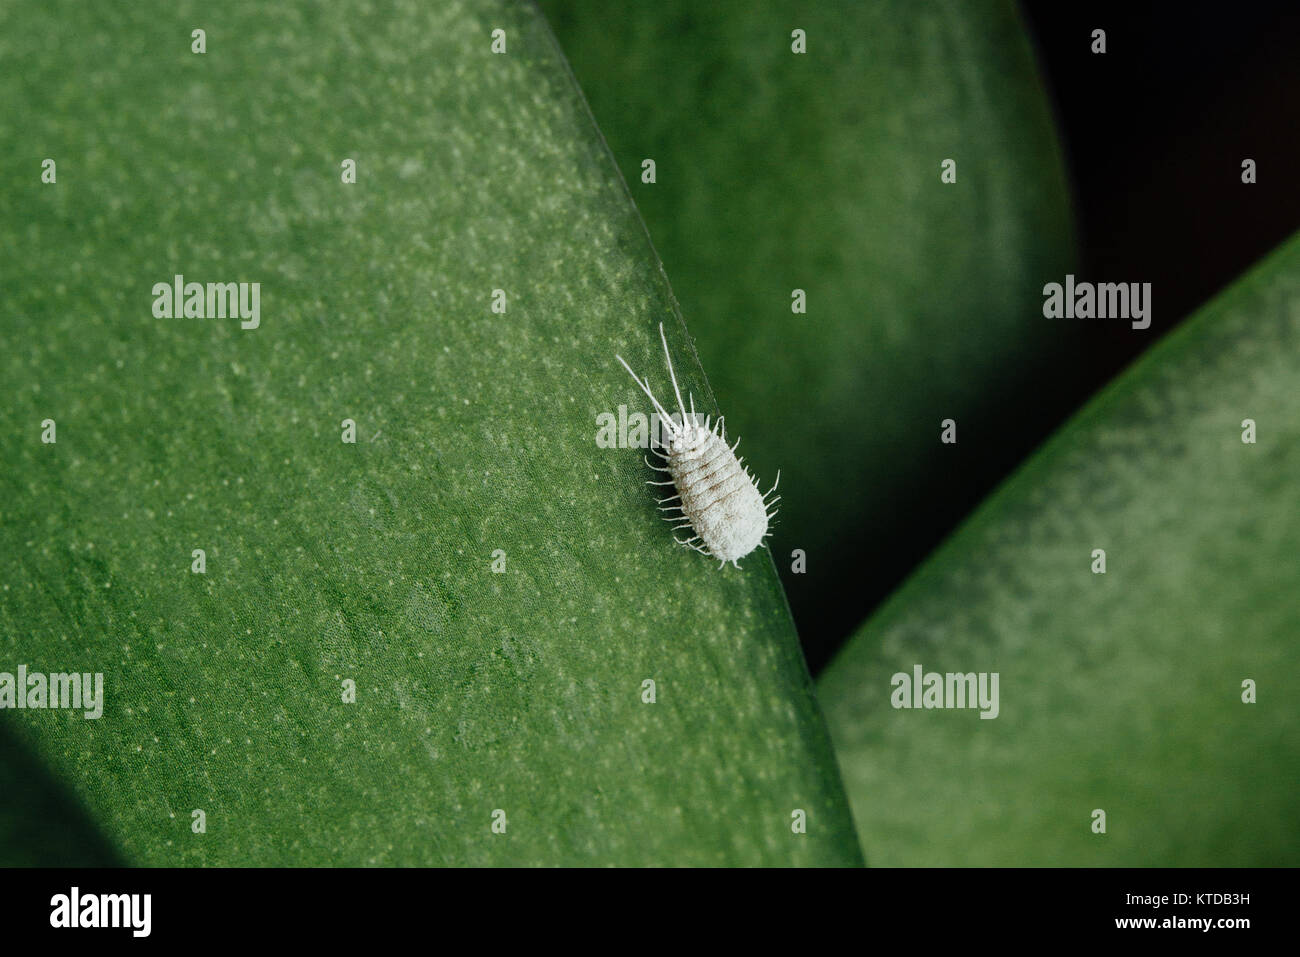 Closeup of a mealybug on an orchid leaf, mealybugs are pests that feed from plant juices. Stock Photo